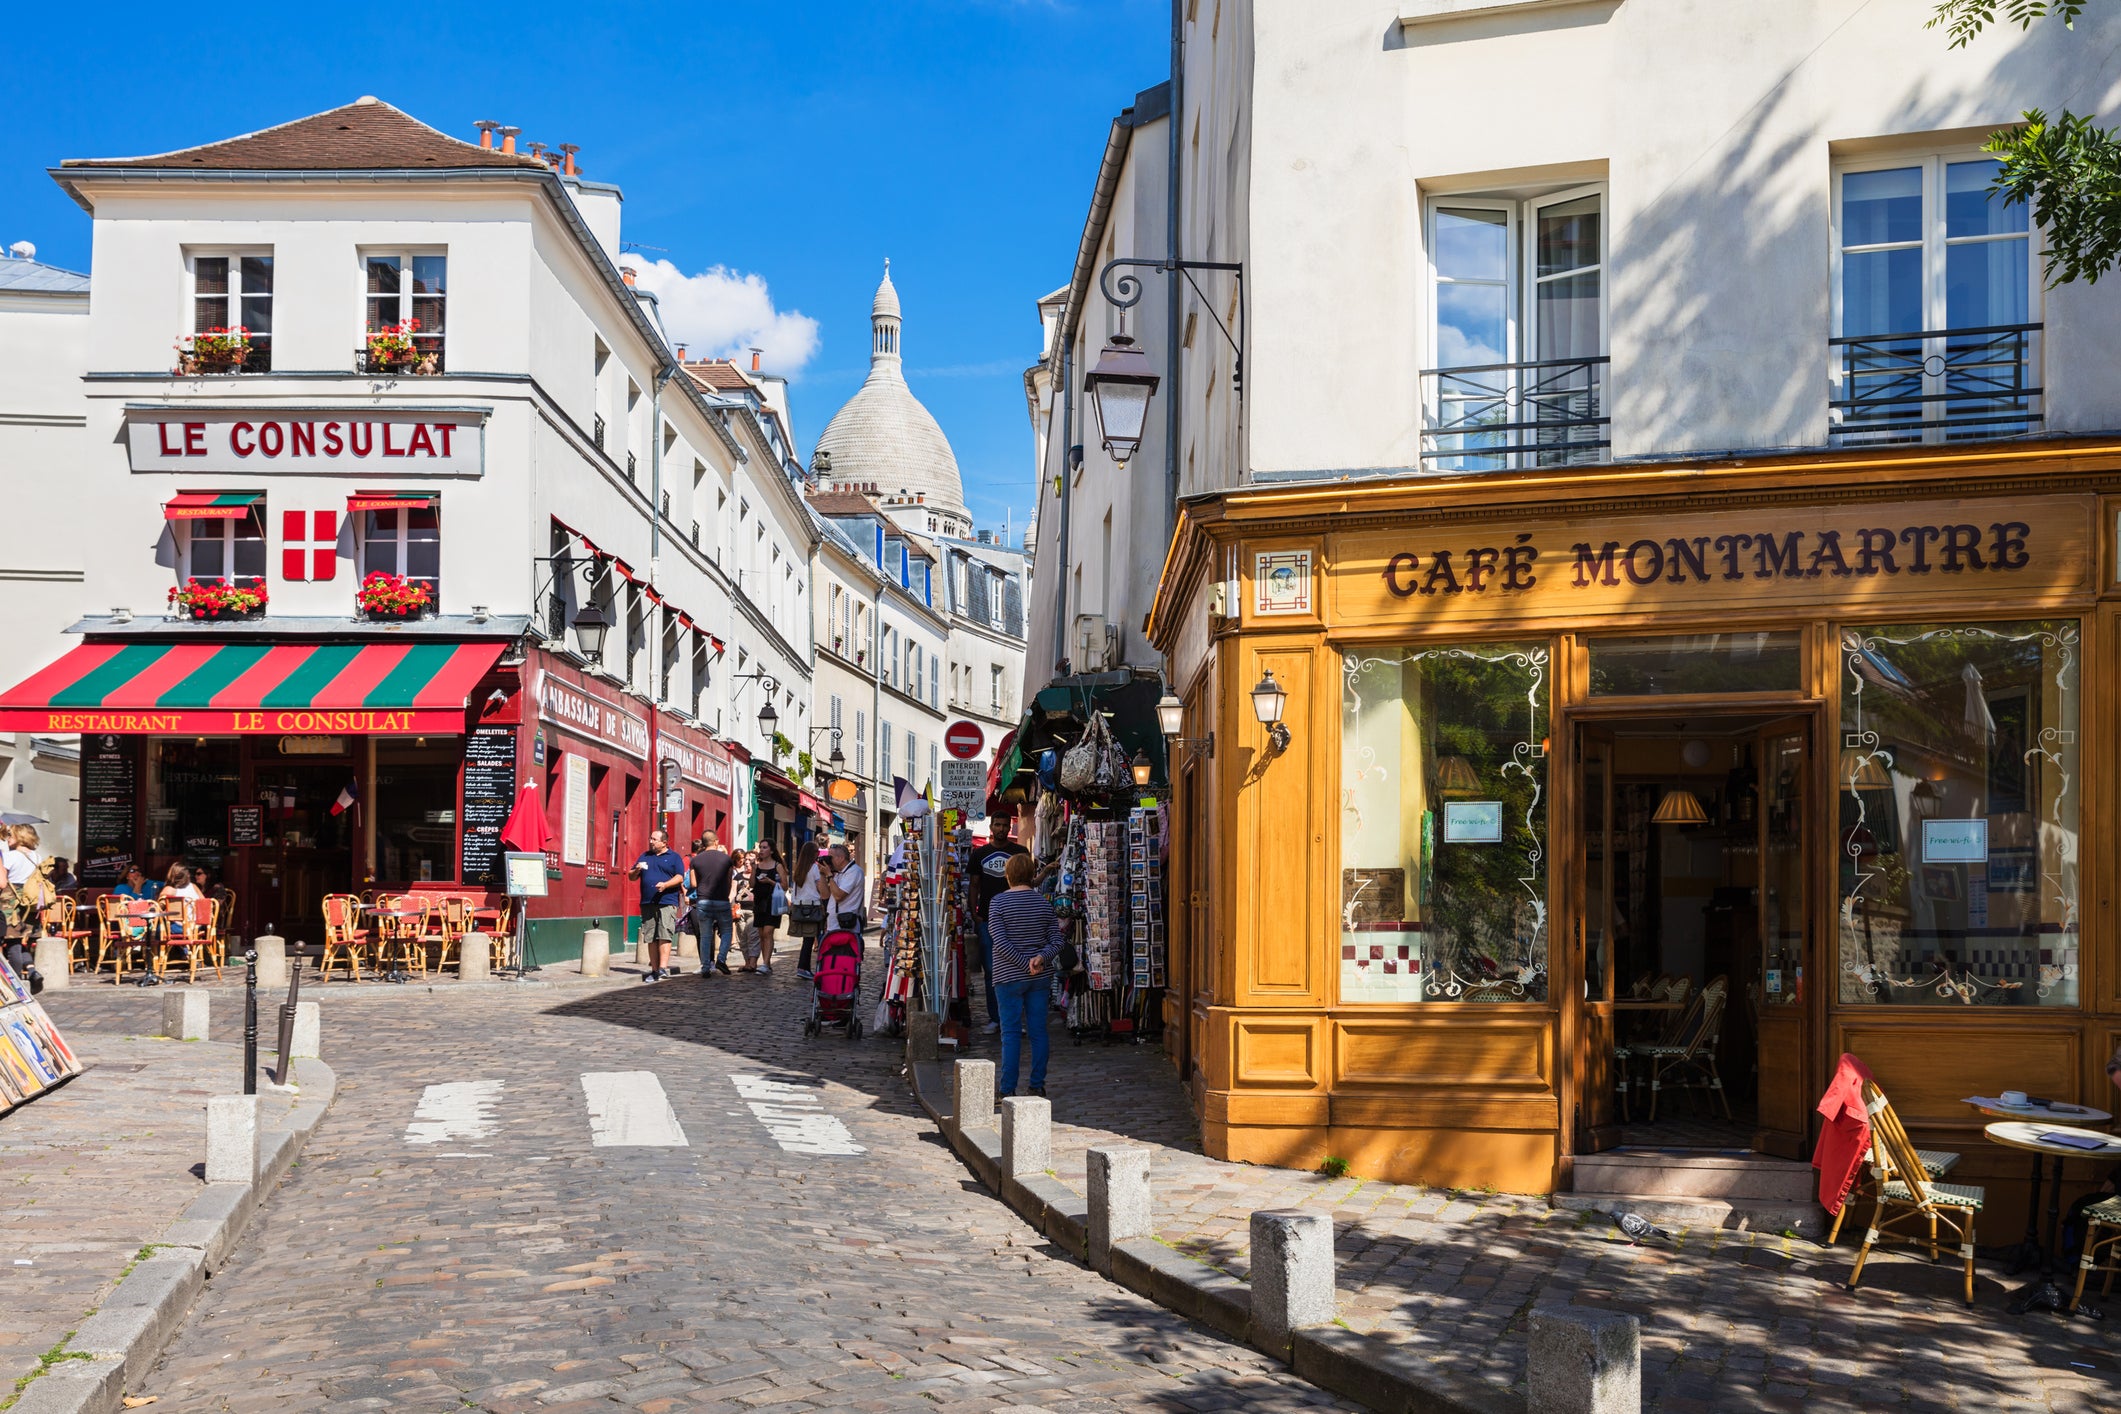 Montmatre is full of charming cafes